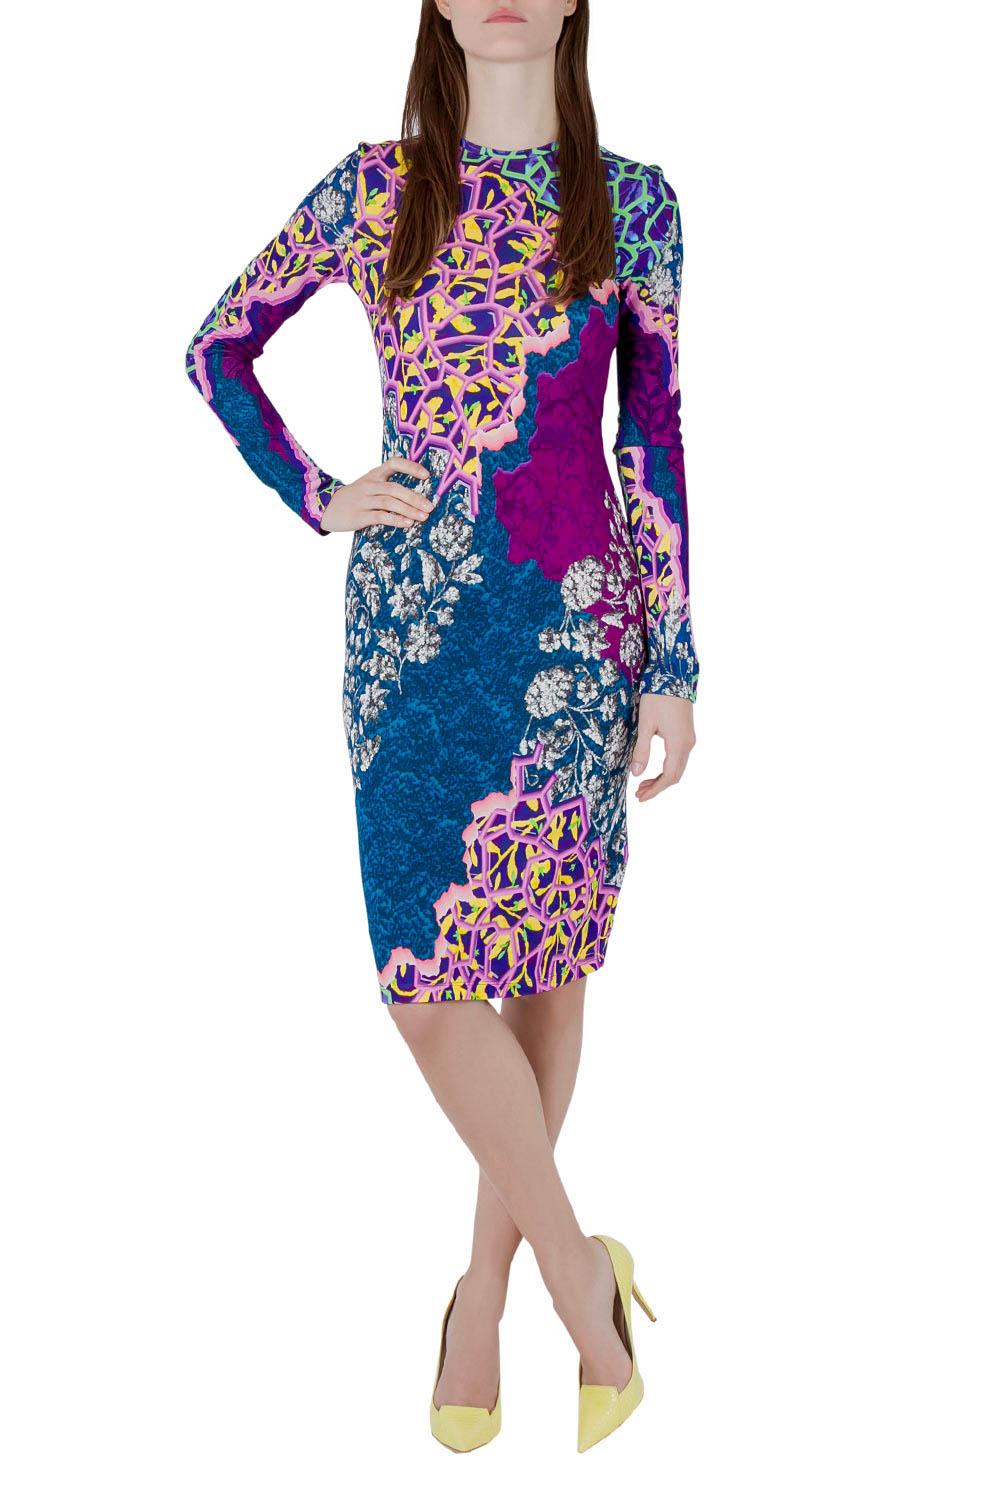 Made from a fine fabric blend, this multicolor bodycon dress is designed by Peter Pilotto. Skillfully tailored, the creation is covered in an enticing marine print and features long sleeves. A lovely piece to add to your collection.

Includes: The